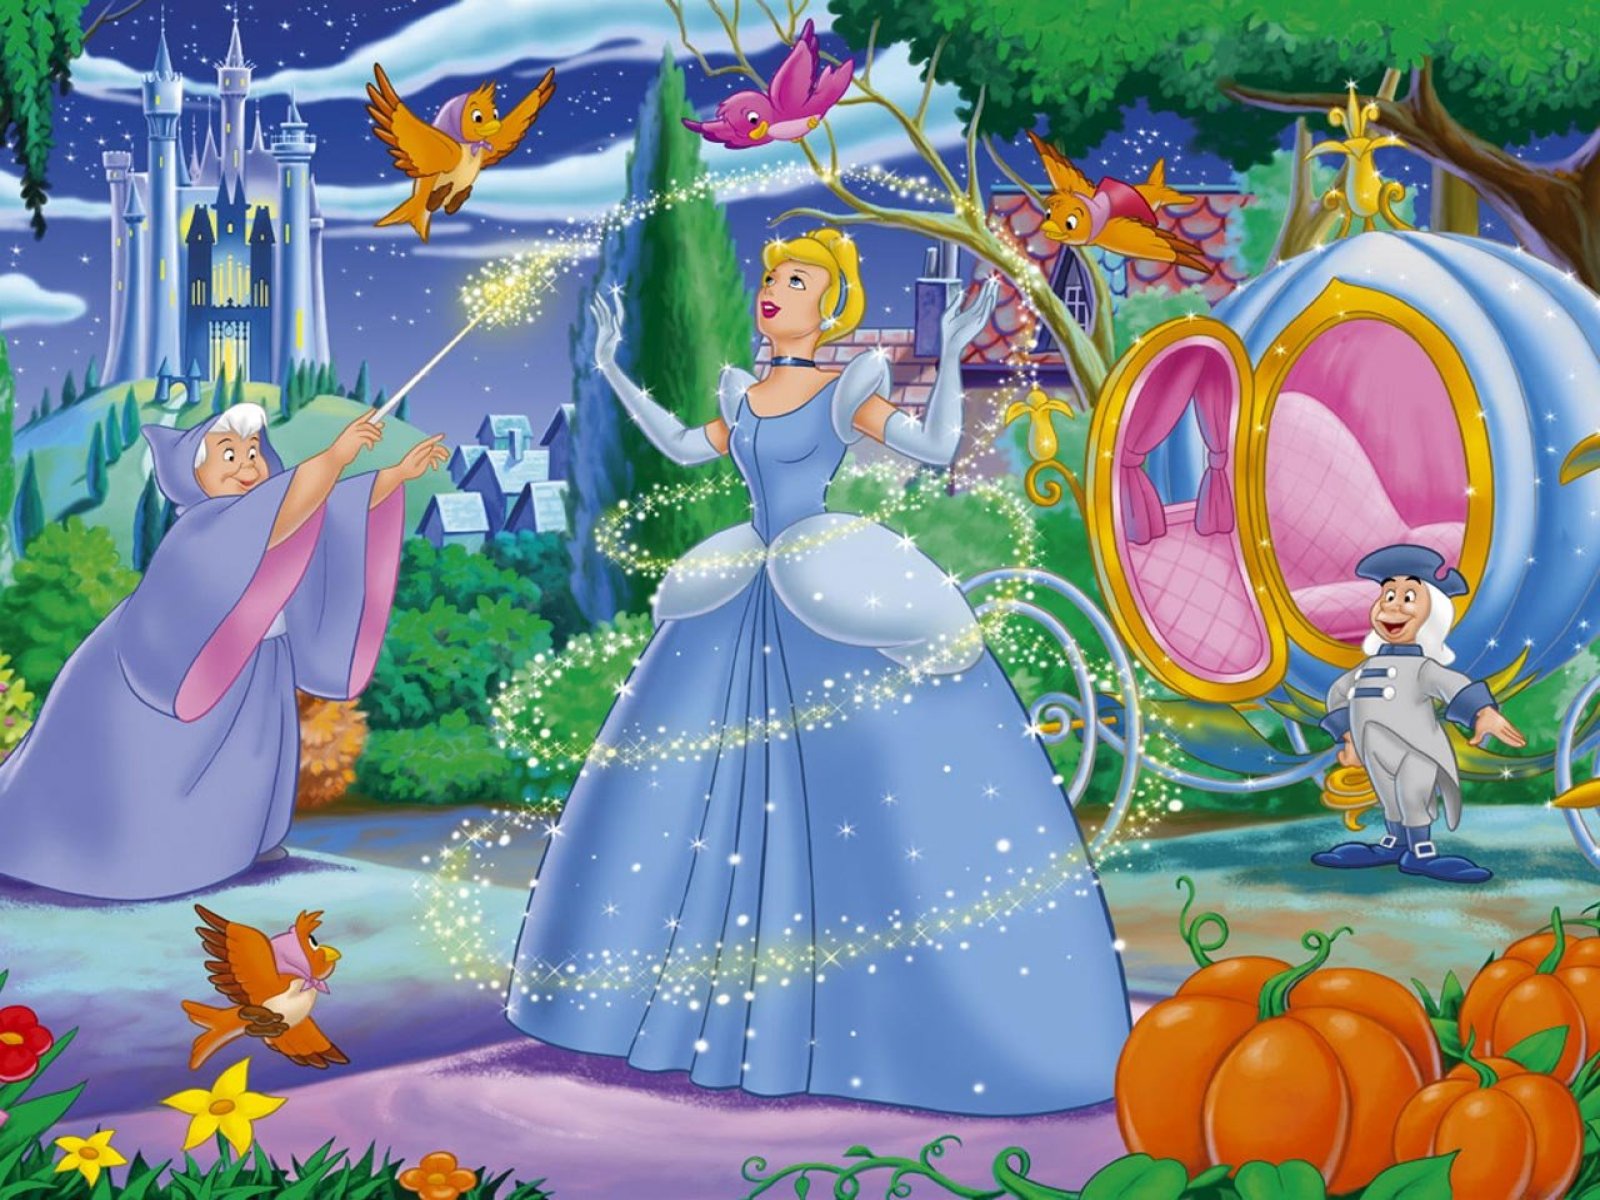 Cinderella (1950) wallpapers for desktop, download free Cinderella (1950)  pictures and backgrounds for PC 